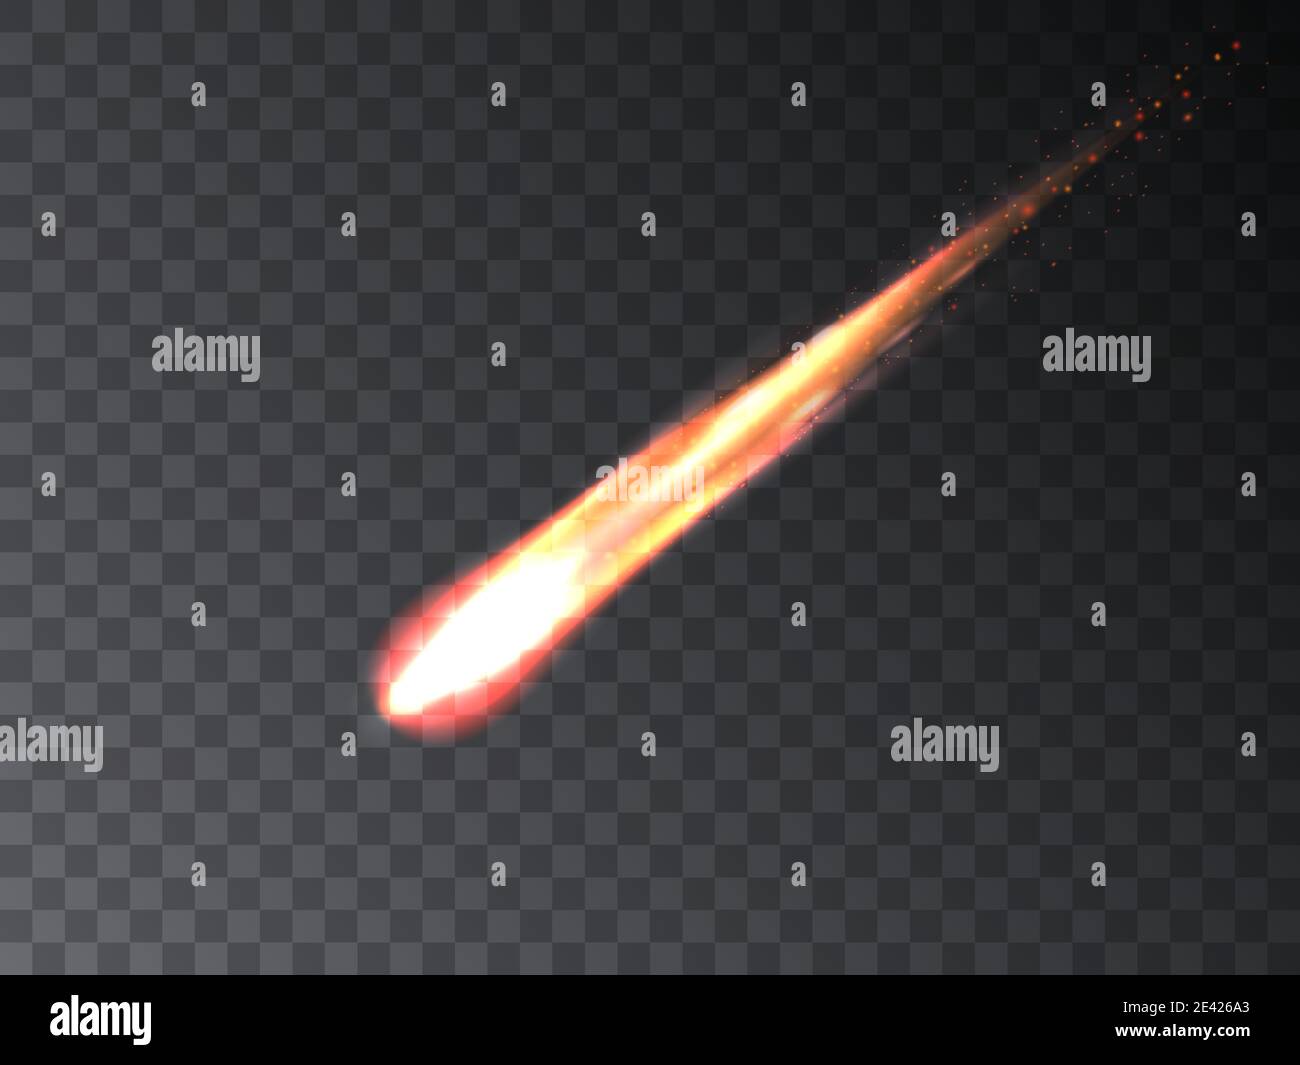 Falling meteorite. Burning fireball asteroid. Vector illustration of a falling flying burning comet meteor on a transparent background. Stock Vector